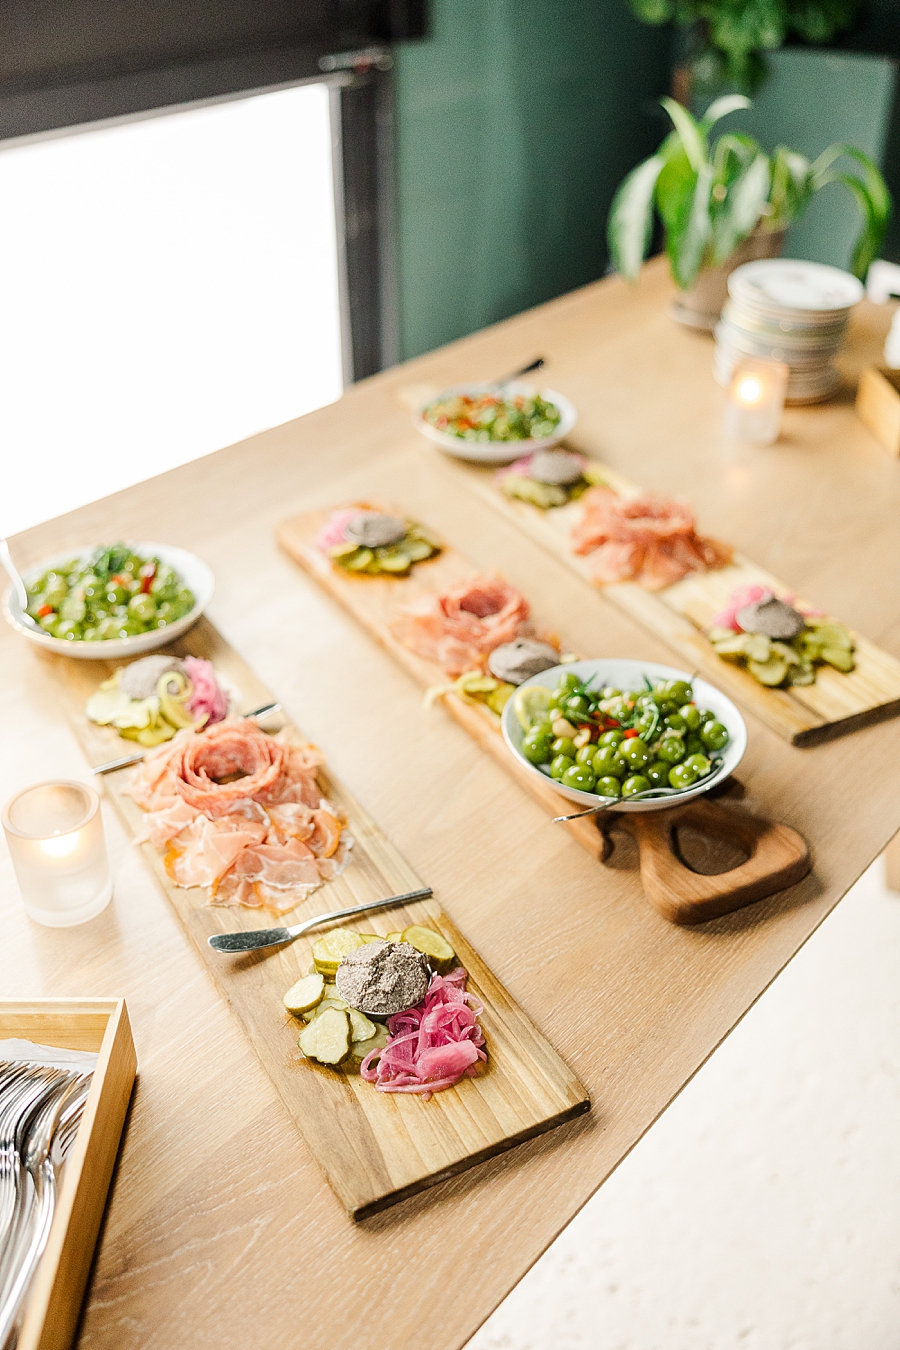 Charcuterie boards by Amanda May Photos